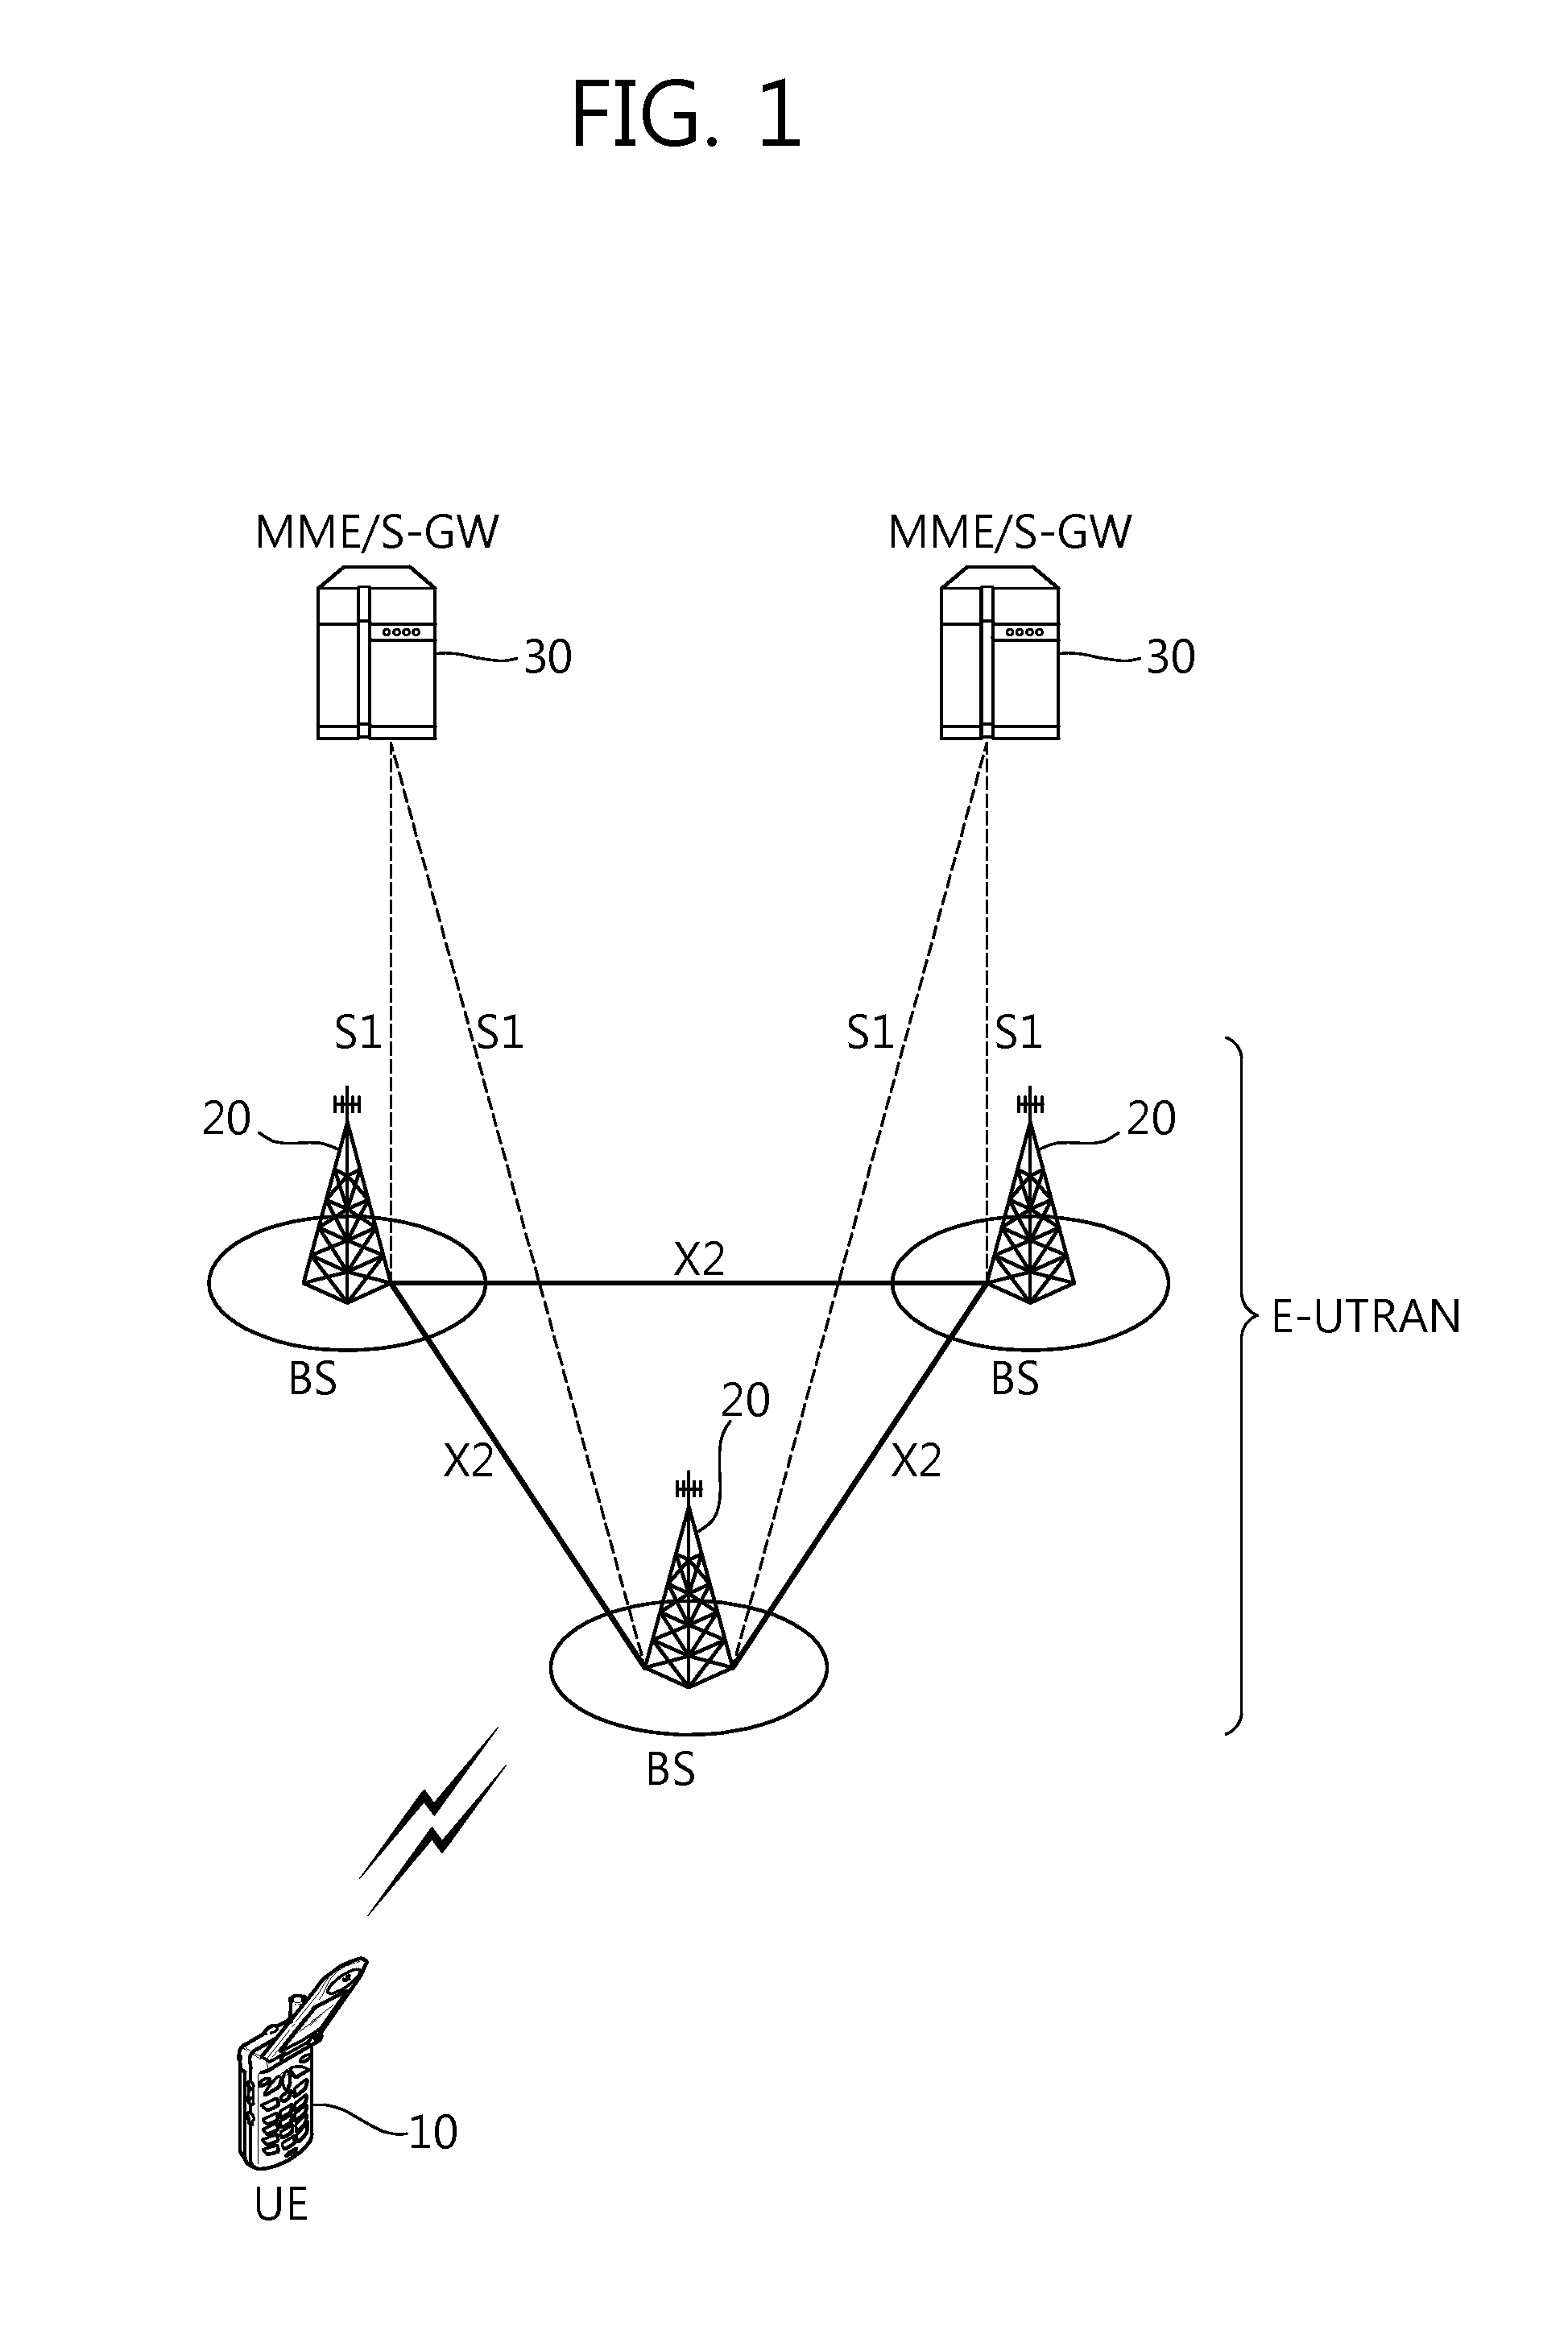 Method for measuring and reporting csi-rs in wireless communication system, and apparatus for supporting same